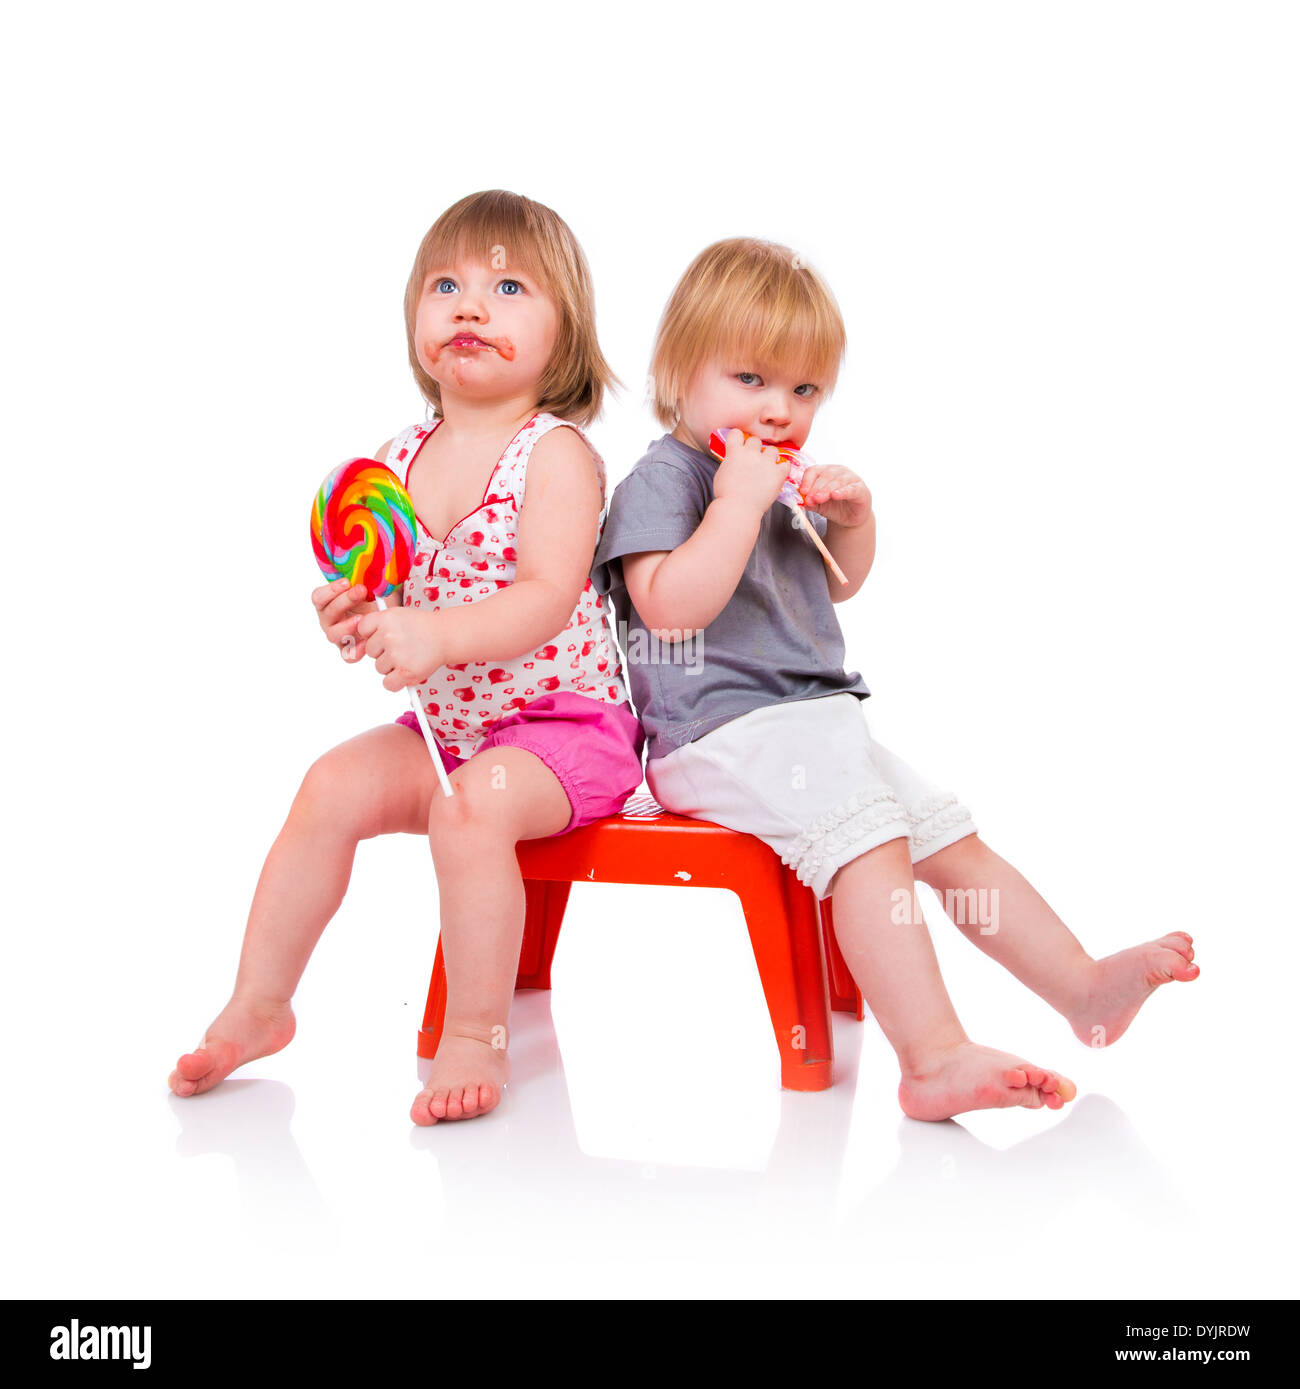 Babies eating a sticky lollipop on white background Stock Photo